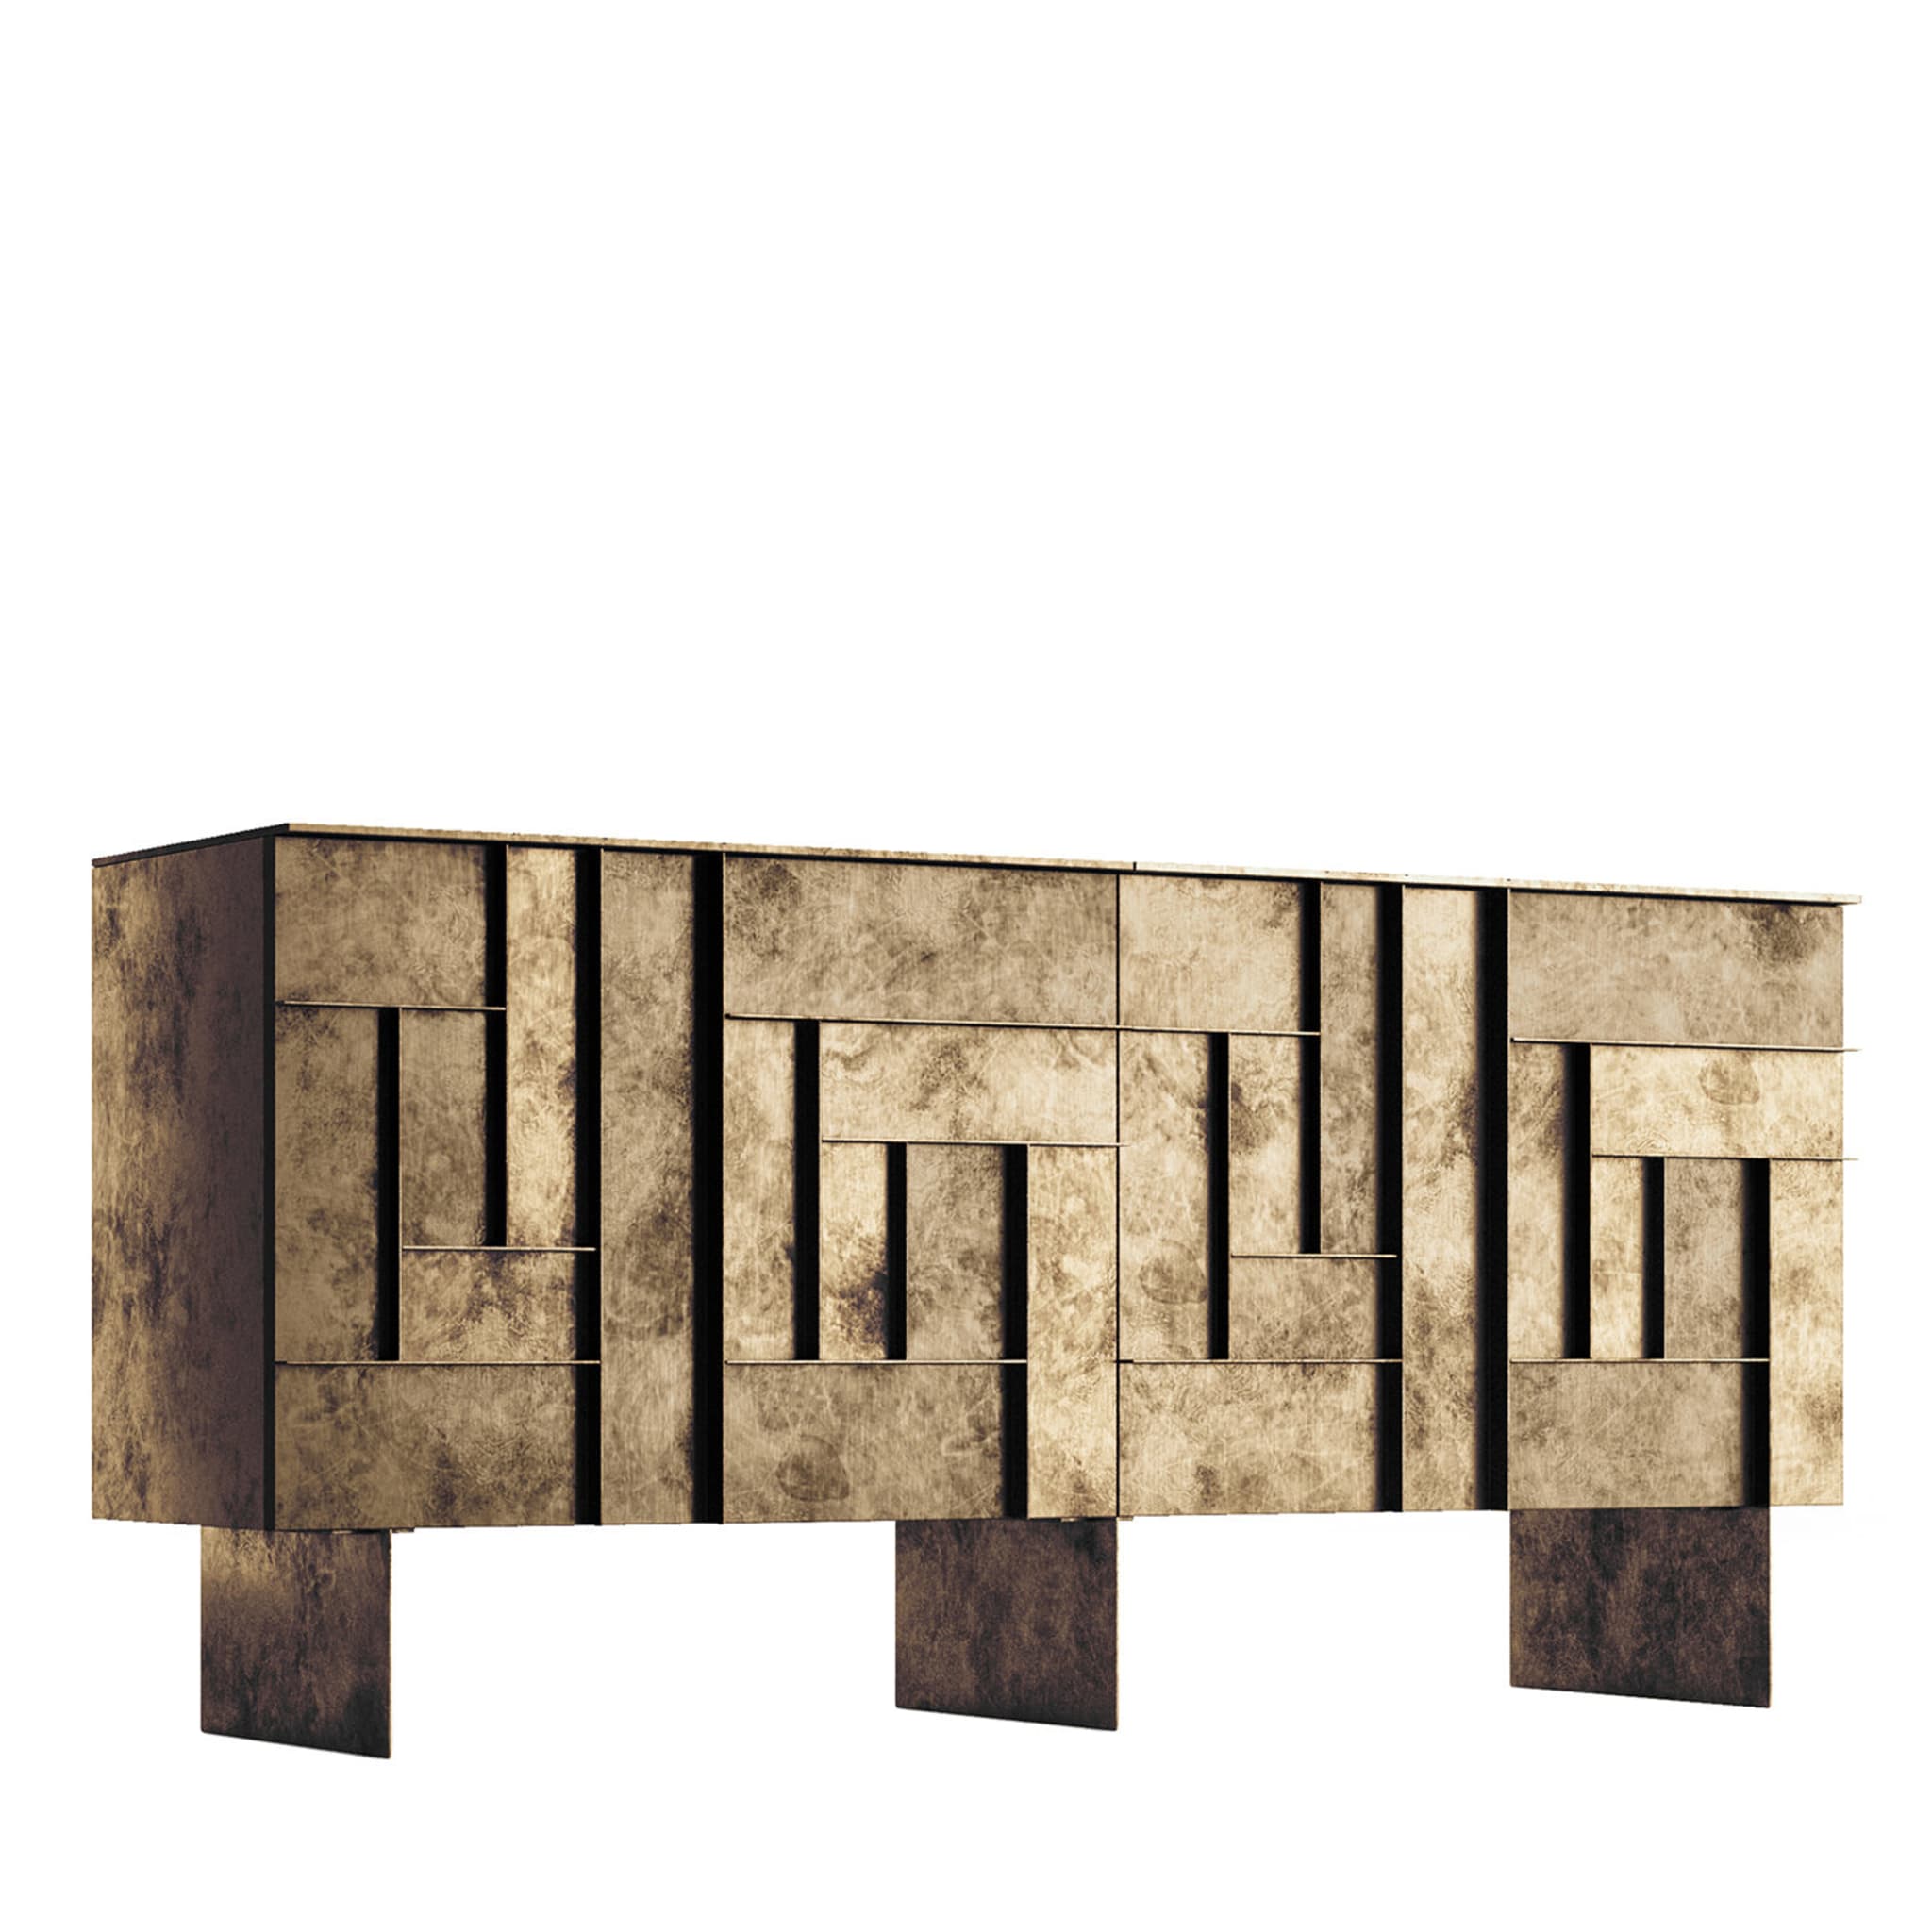 Tracce Layer Double Sideboard by Giuseppe Maurizio Scutellà  - Main view